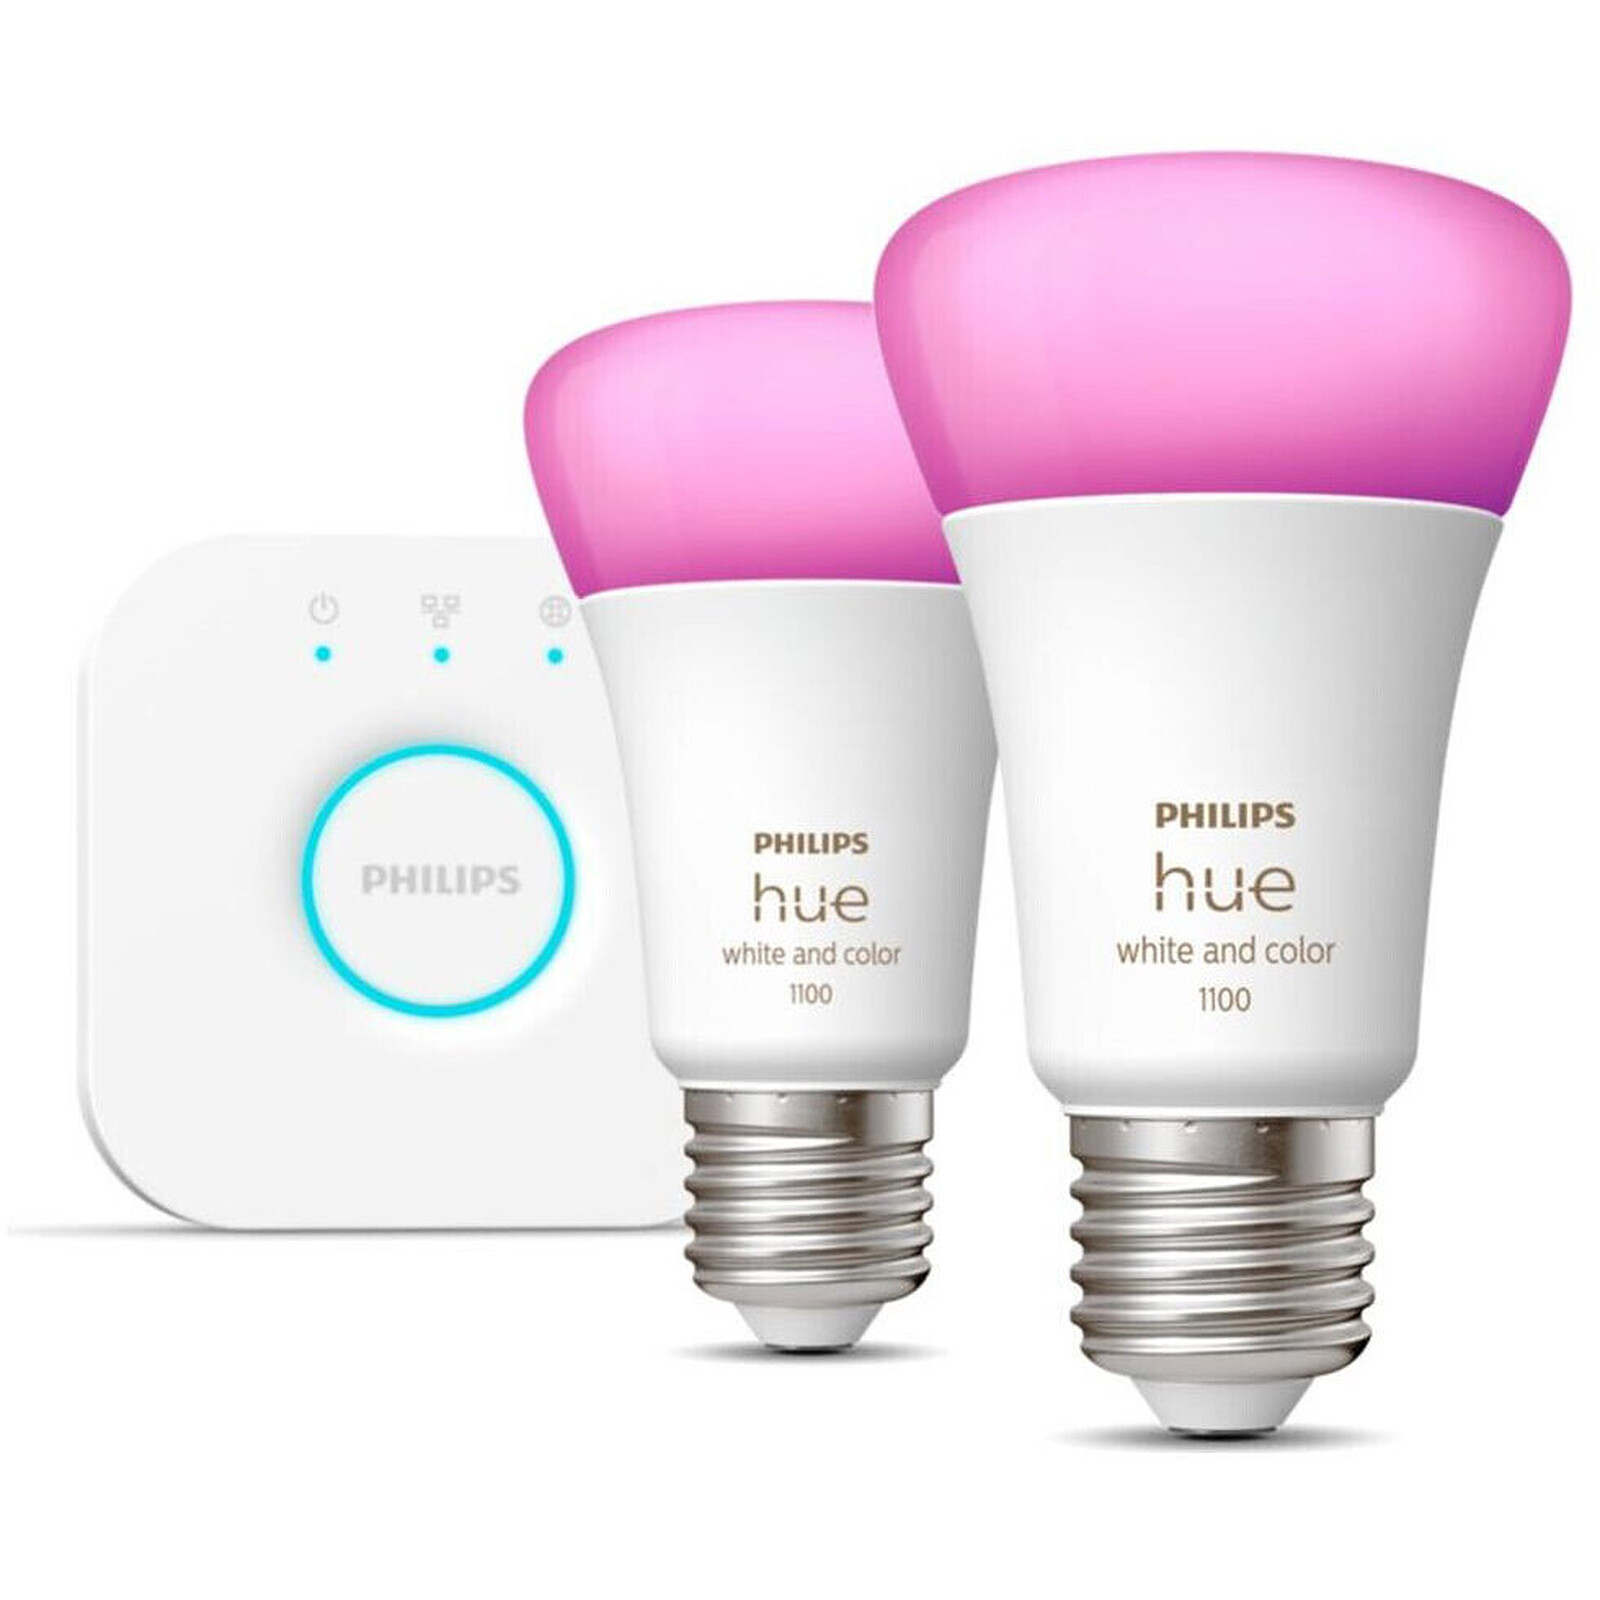 Philips Hue White and Color Ambiance Starter Kit E27 A60 11 W Bluetooth x  Smart light bulb LDLC 3-year warranty